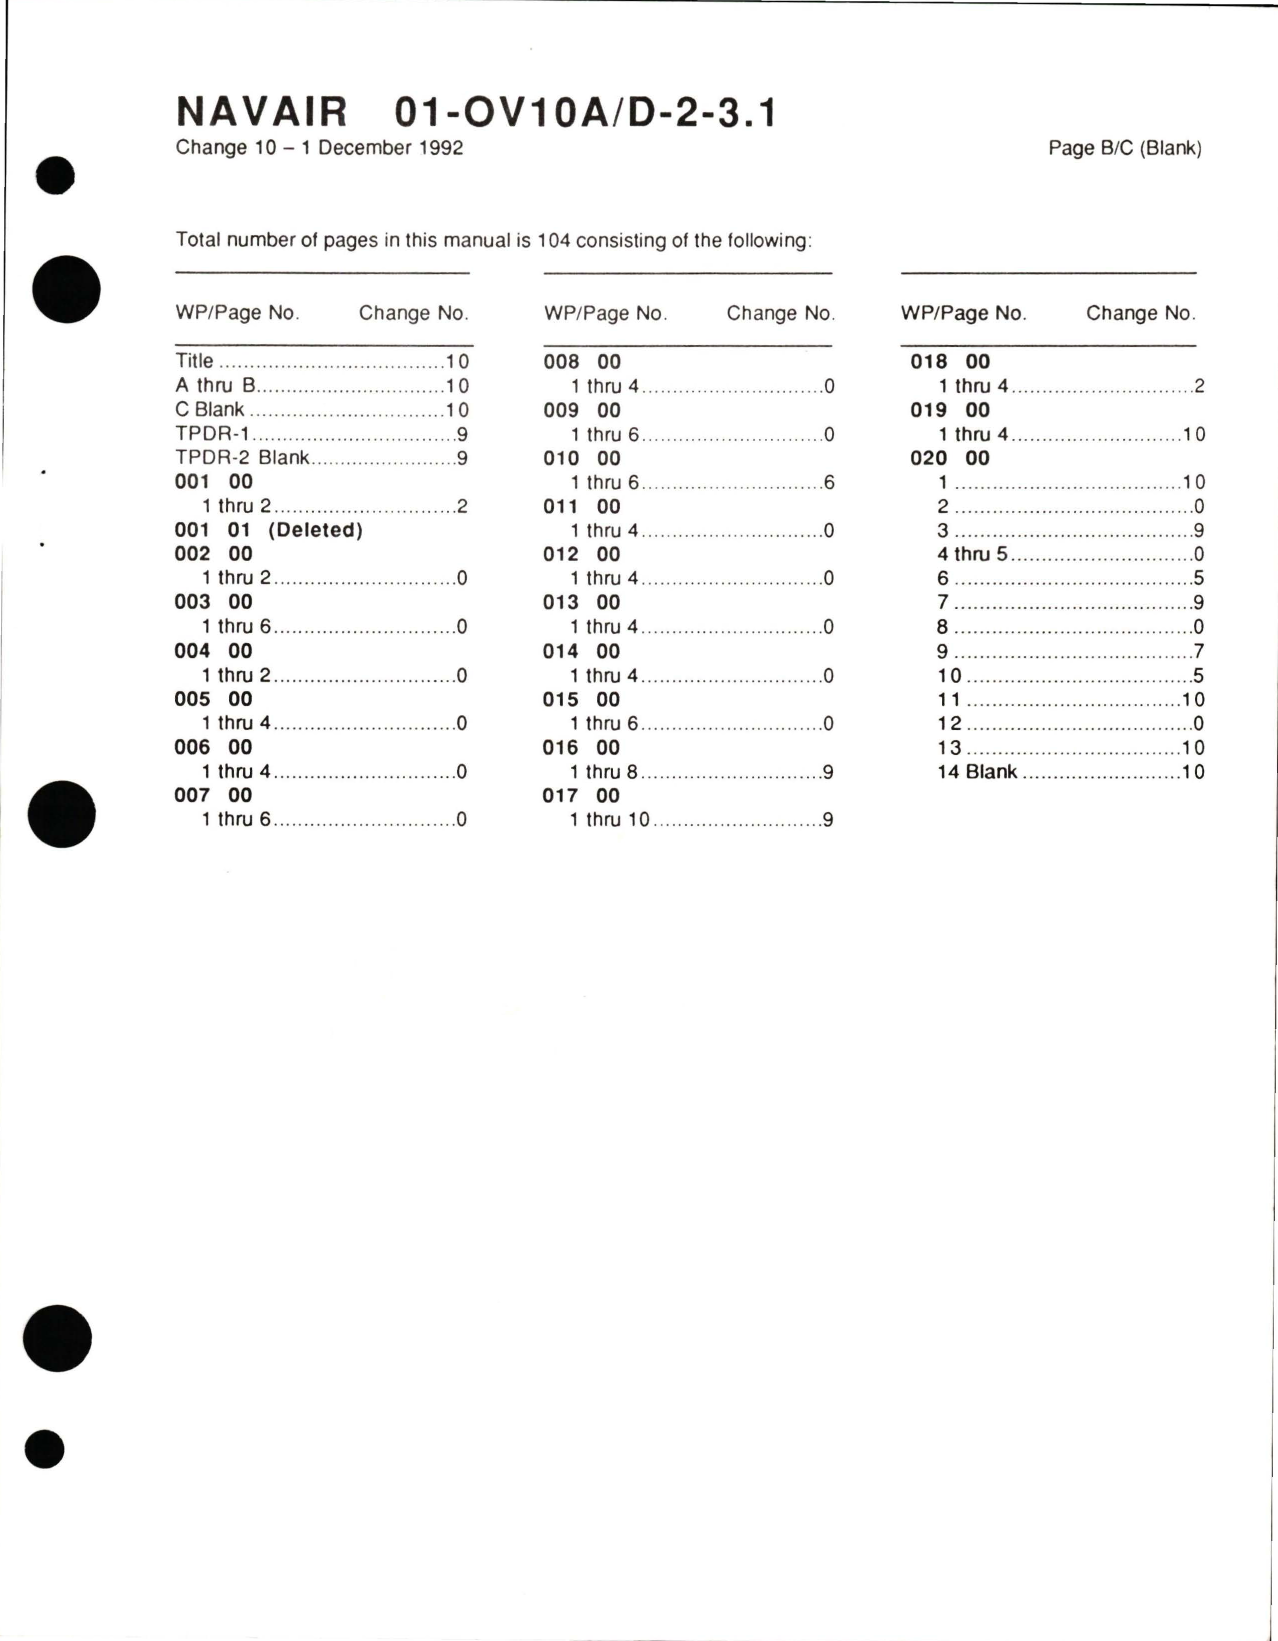 Sample page 7 from AirCorps Library document: Organizational Maintenance with Illustrated Parts Breakdown for Environmental Systems for OV-10A/D